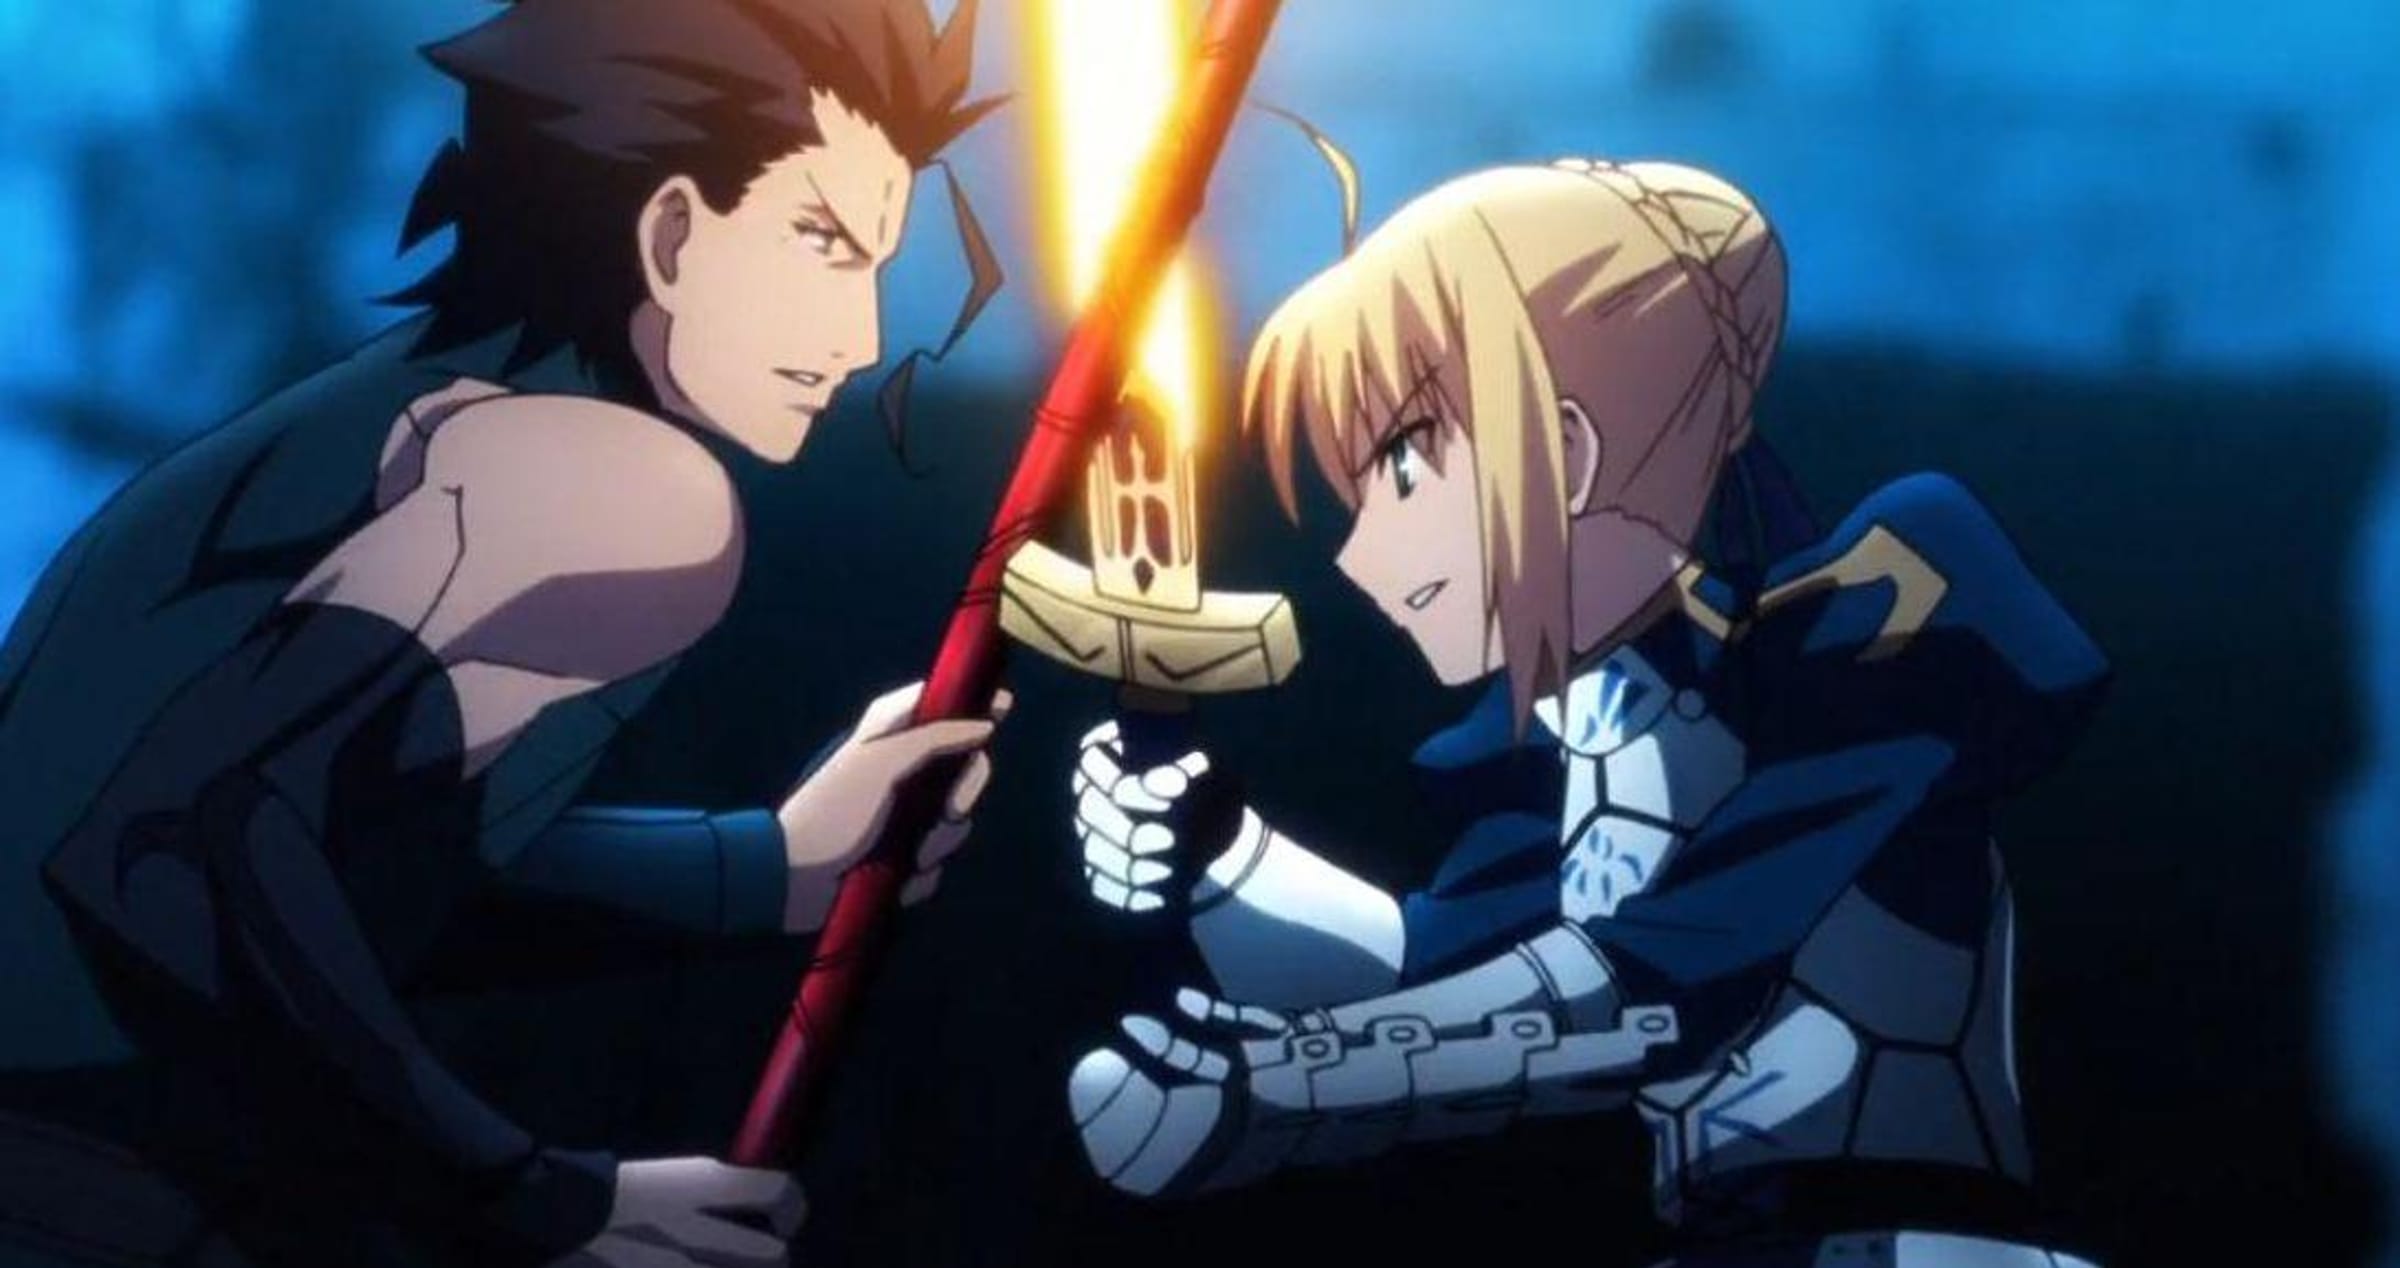 GIF/Avatars from Fate/zero S2 episode 6 - Forums 